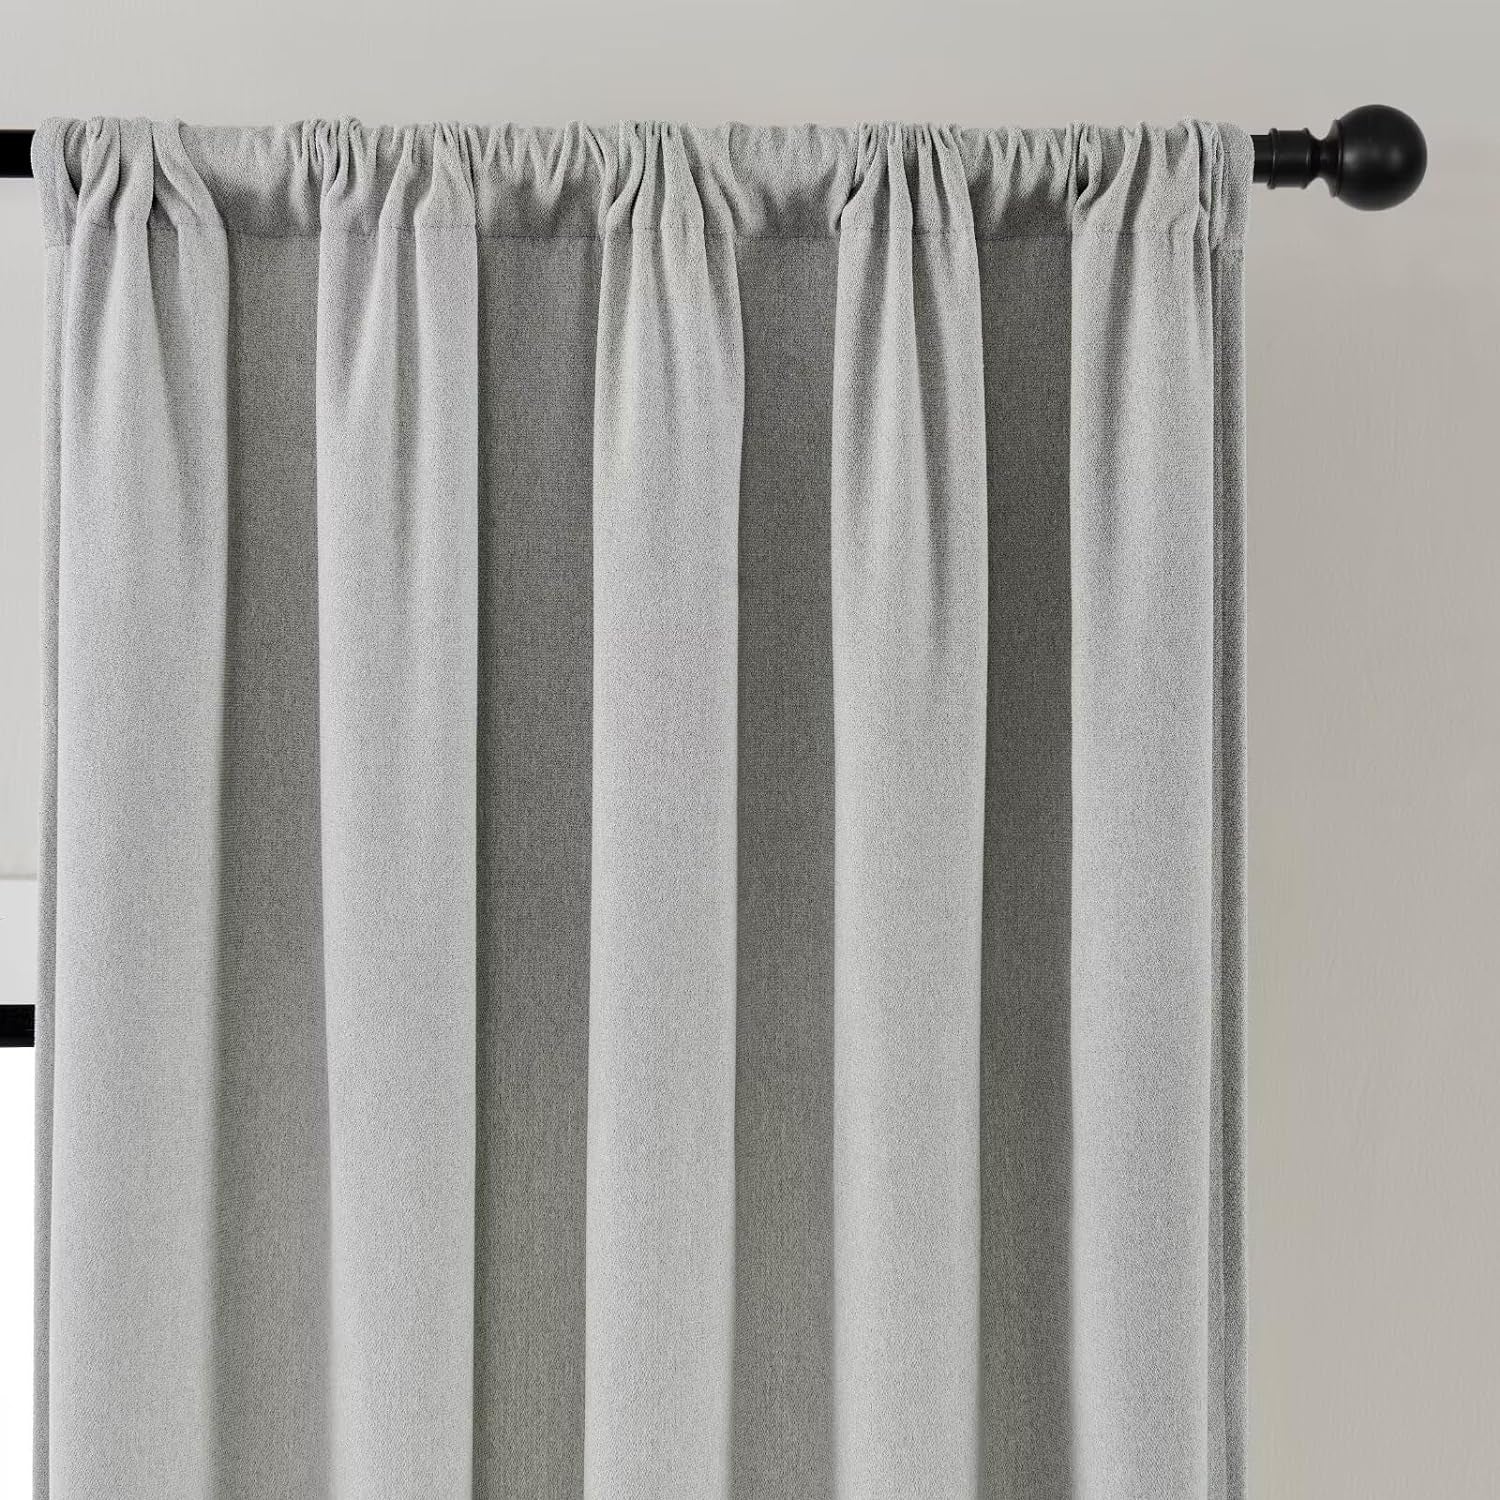 Joydeco Light Filtering Curtains 96 Inches Long for Bedroom Living Room, Faux Linen Curtains 96 Inch Length 2 Panels Set,Pinch Pleat Curtains for Bedroom Living Room(52X96 Inch, Greyish White)  Joydeco   